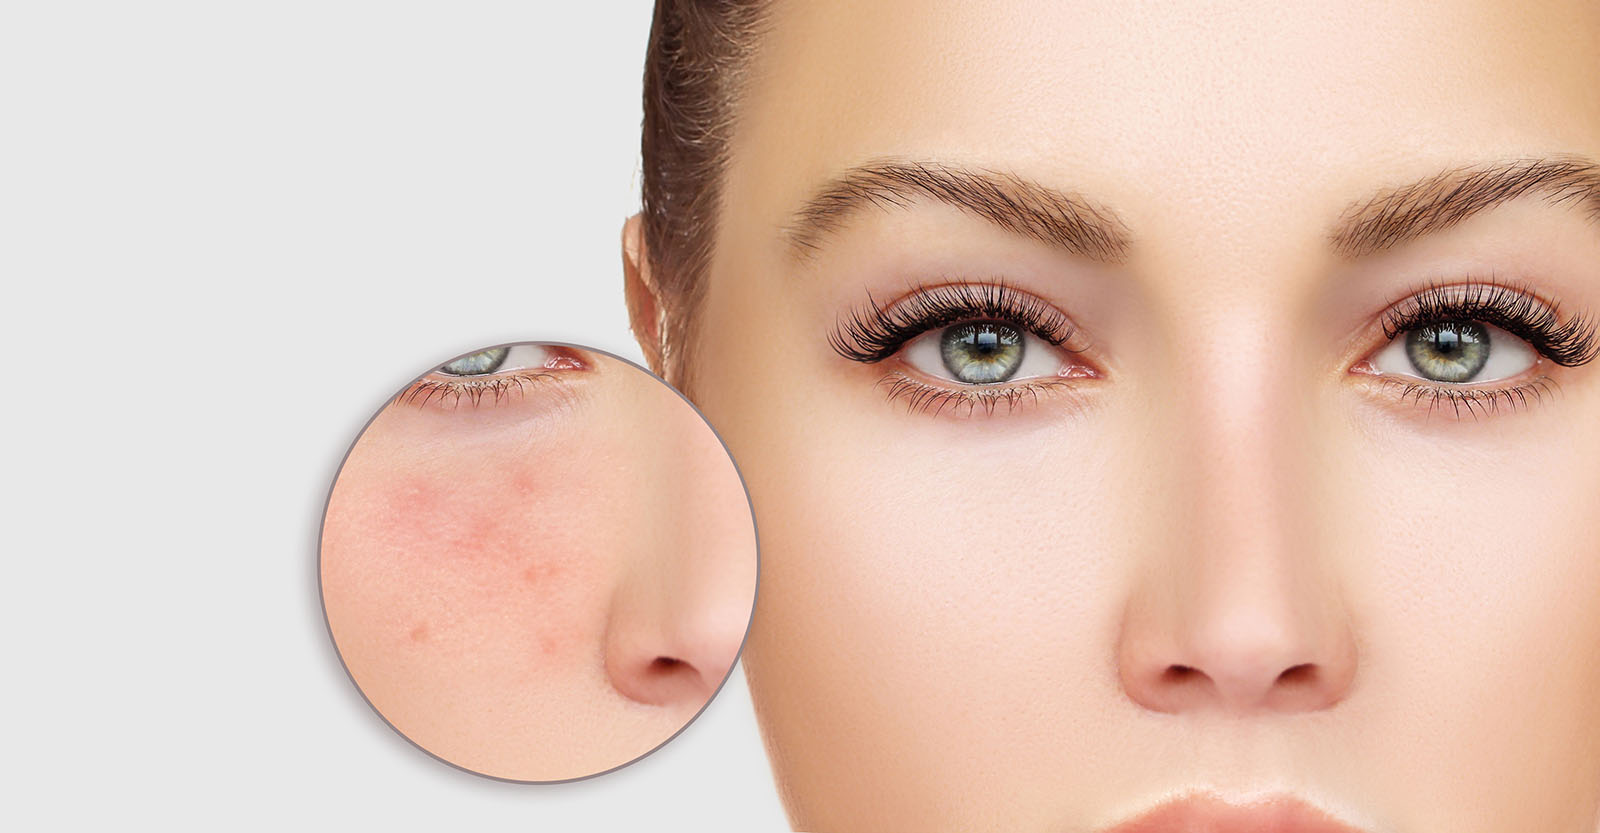 What You Should Know About Acne